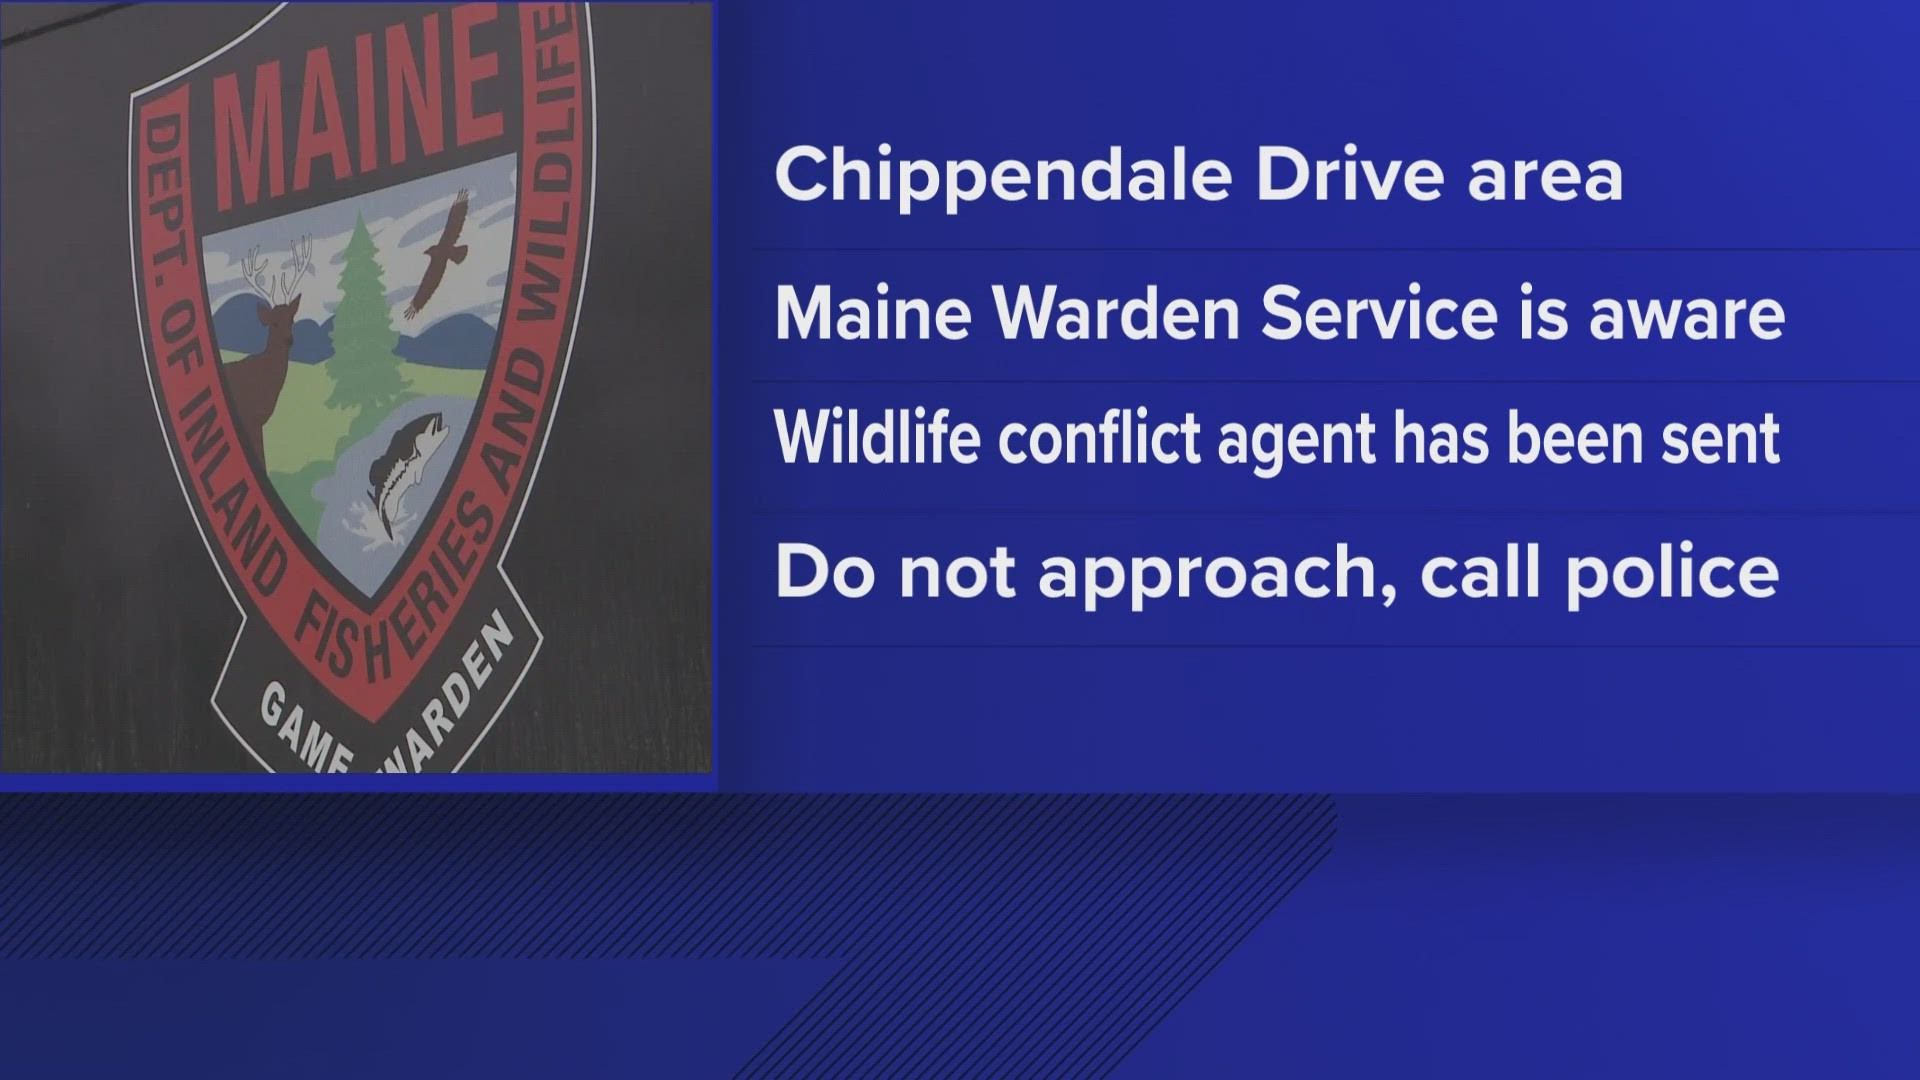 Sanford police said a possible rabid fox may be found in the Chippendale Drive area.